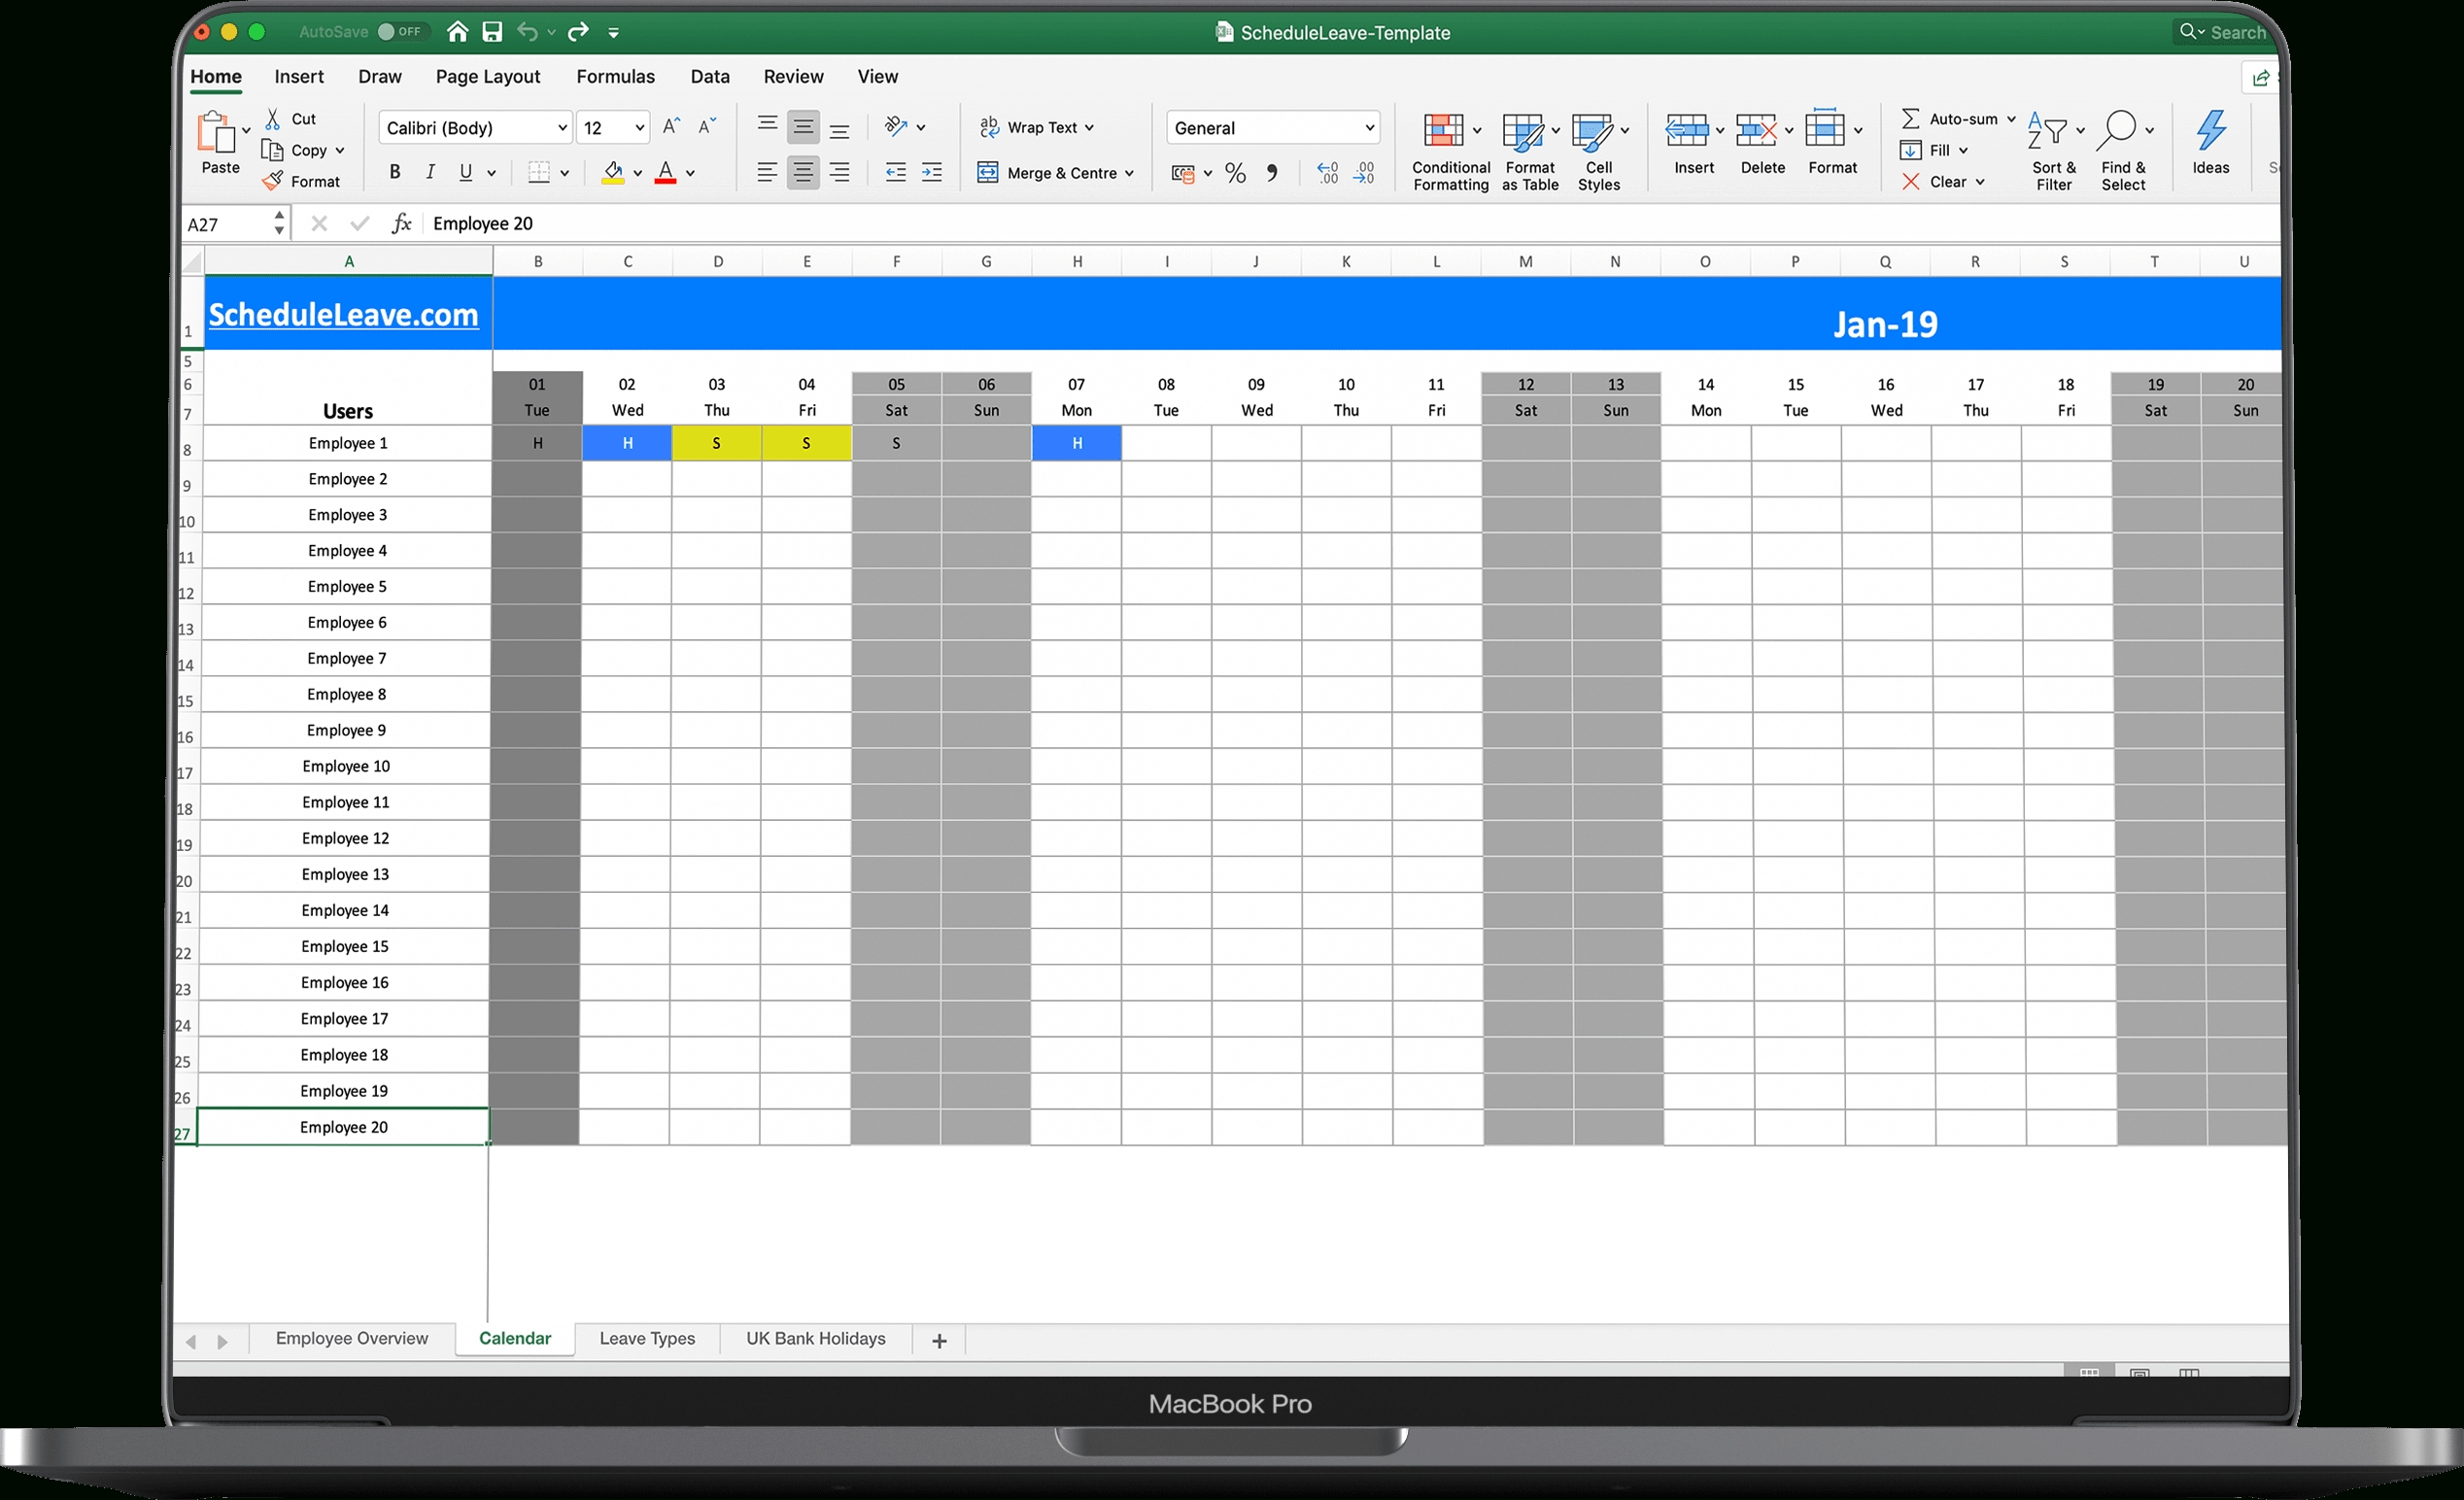 Free Excel Leave Calendar 2021 Spreadsheet Template-2021 Employee Vacation Planner